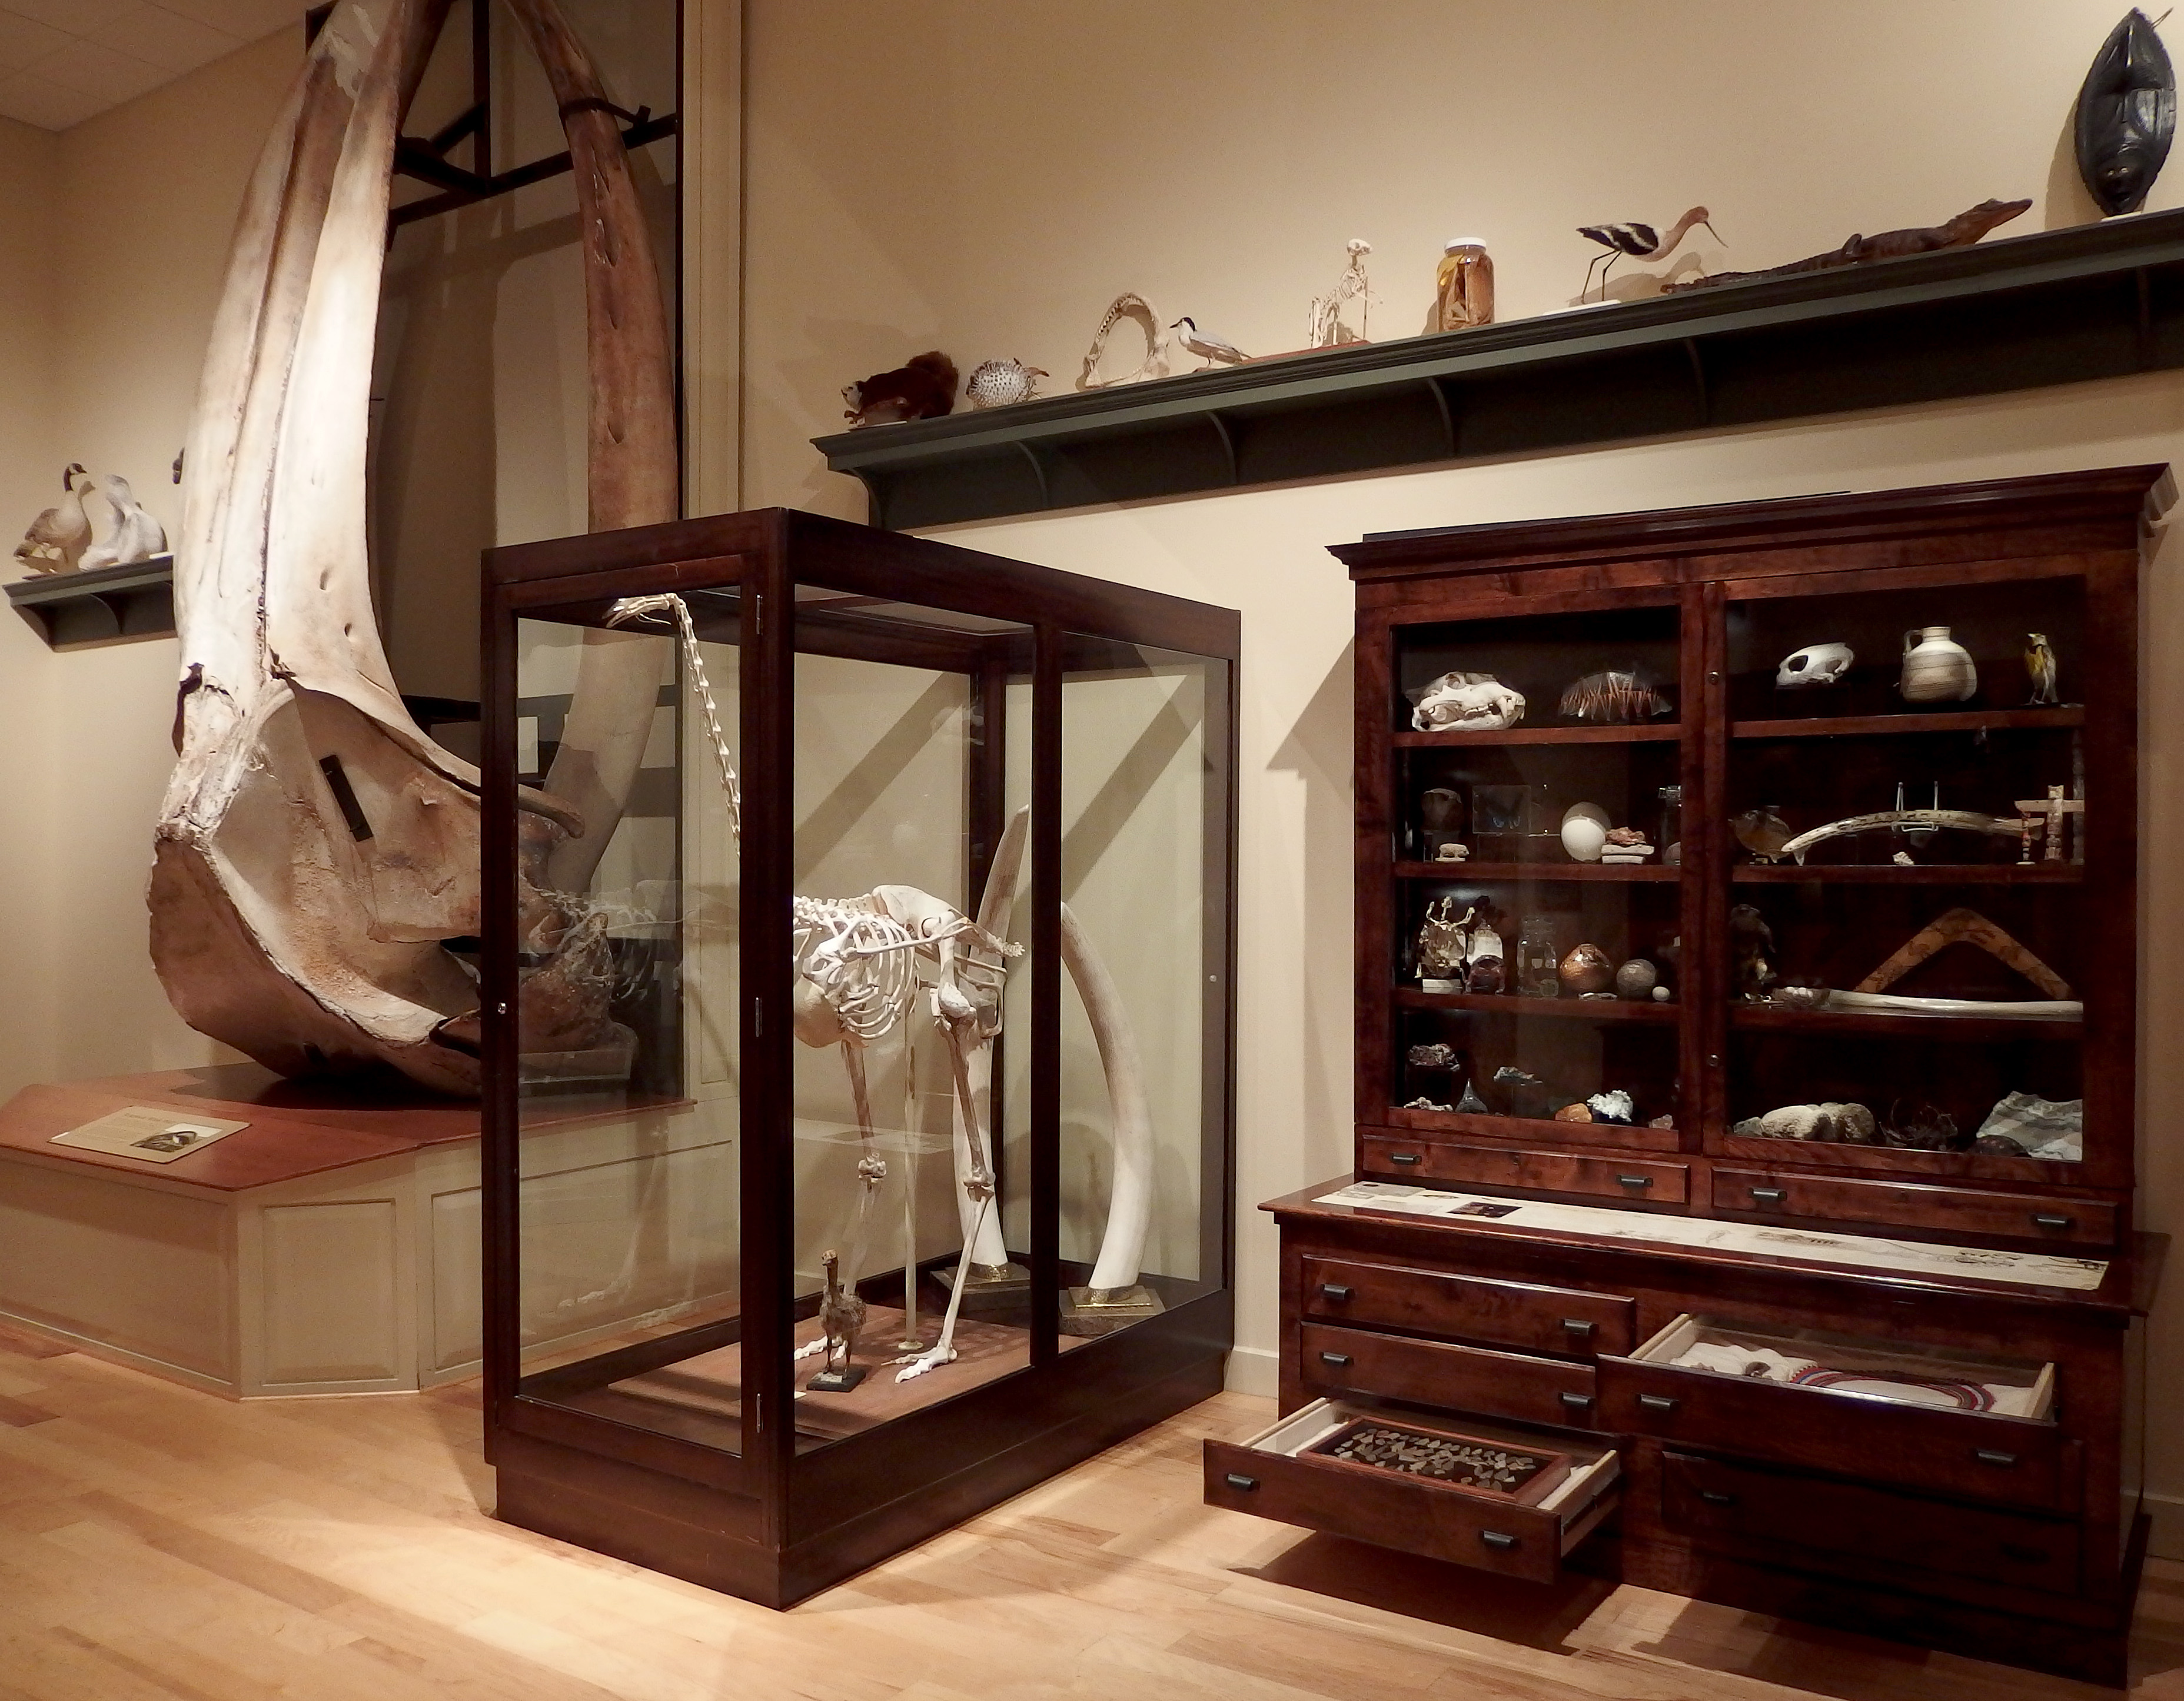 Fig. 4: Stecker’s Cabinet of Curiosities in the Mayborn Museum at Baylor University.